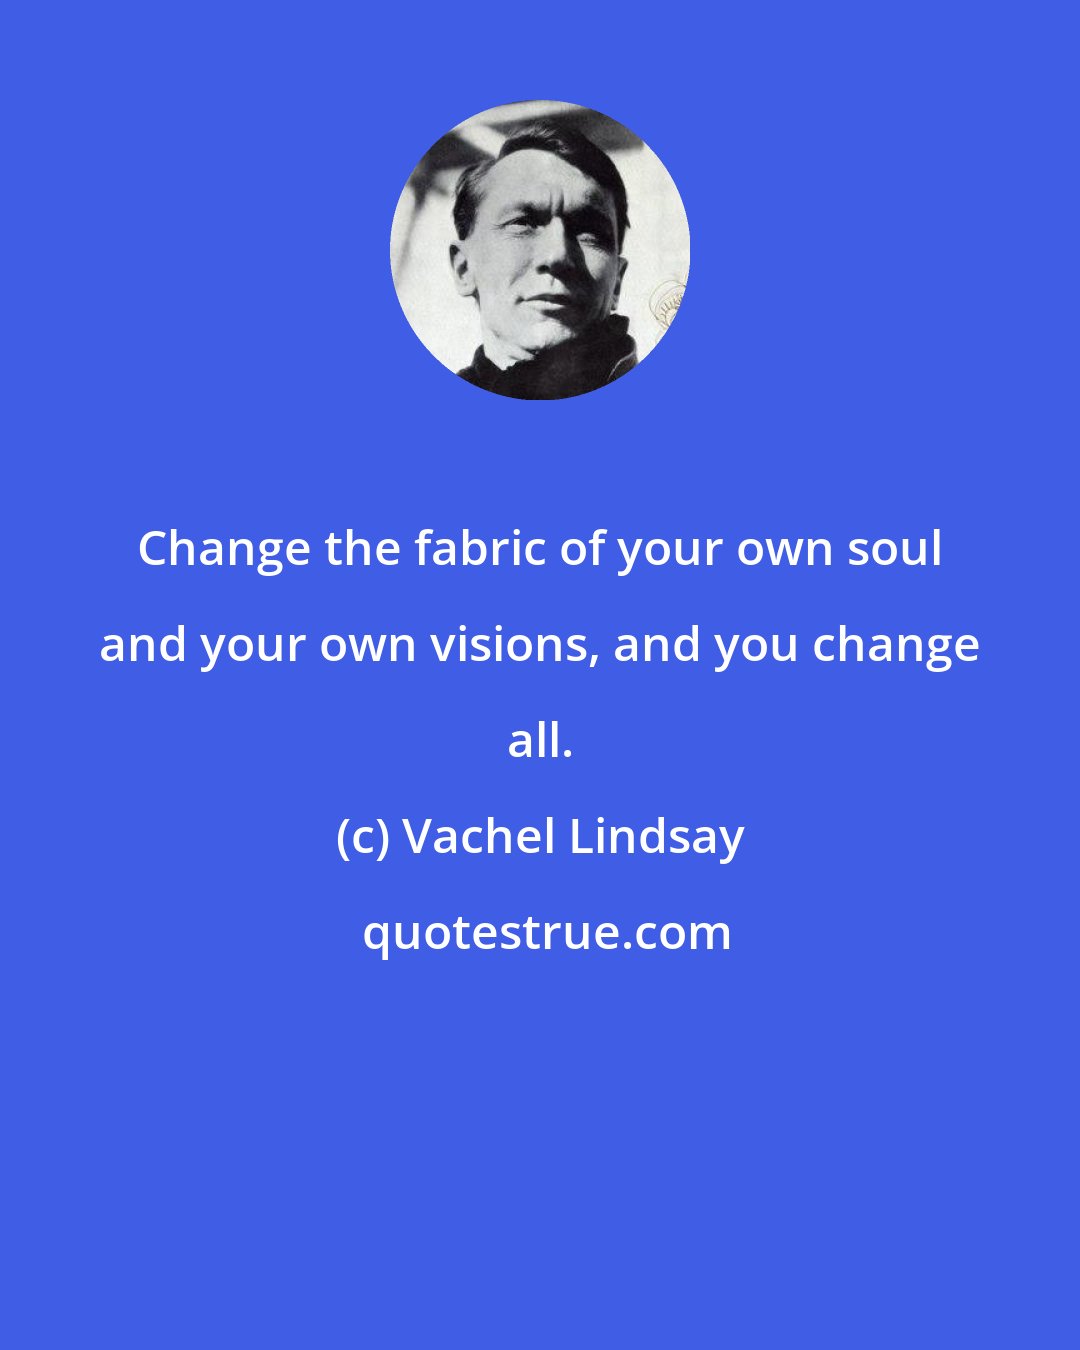 Vachel Lindsay: Change the fabric of your own soul and your own visions, and you change all.